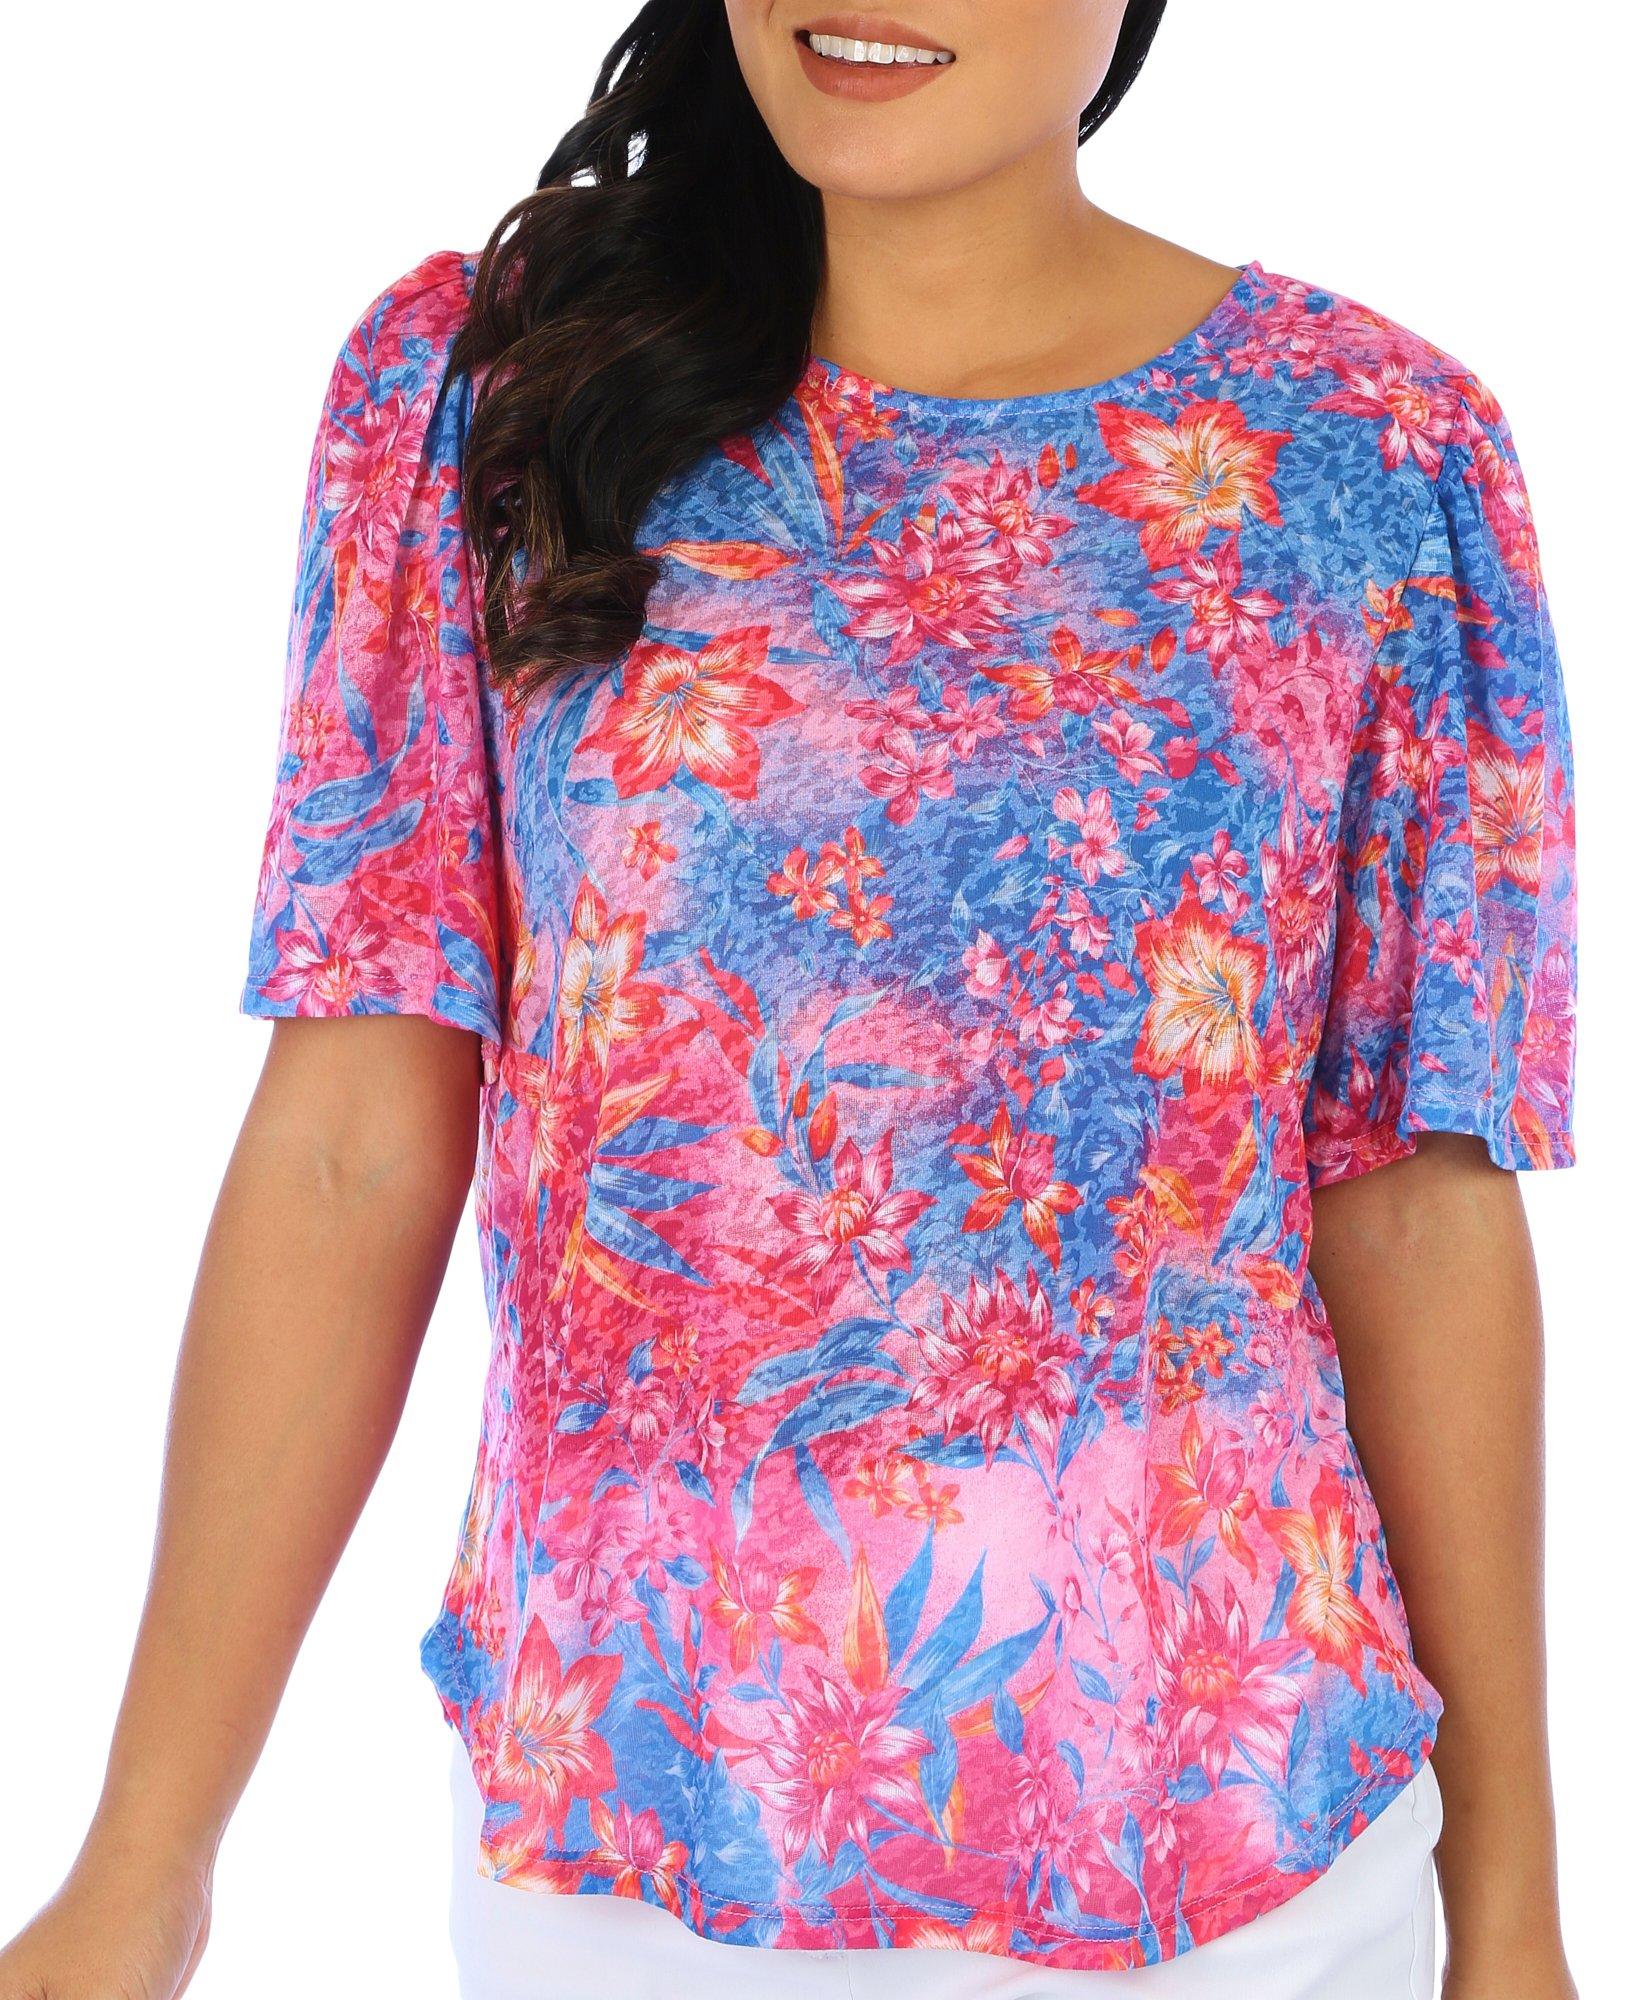 Ruby Road Womens Burnout Floral Print Short Sleeve Top